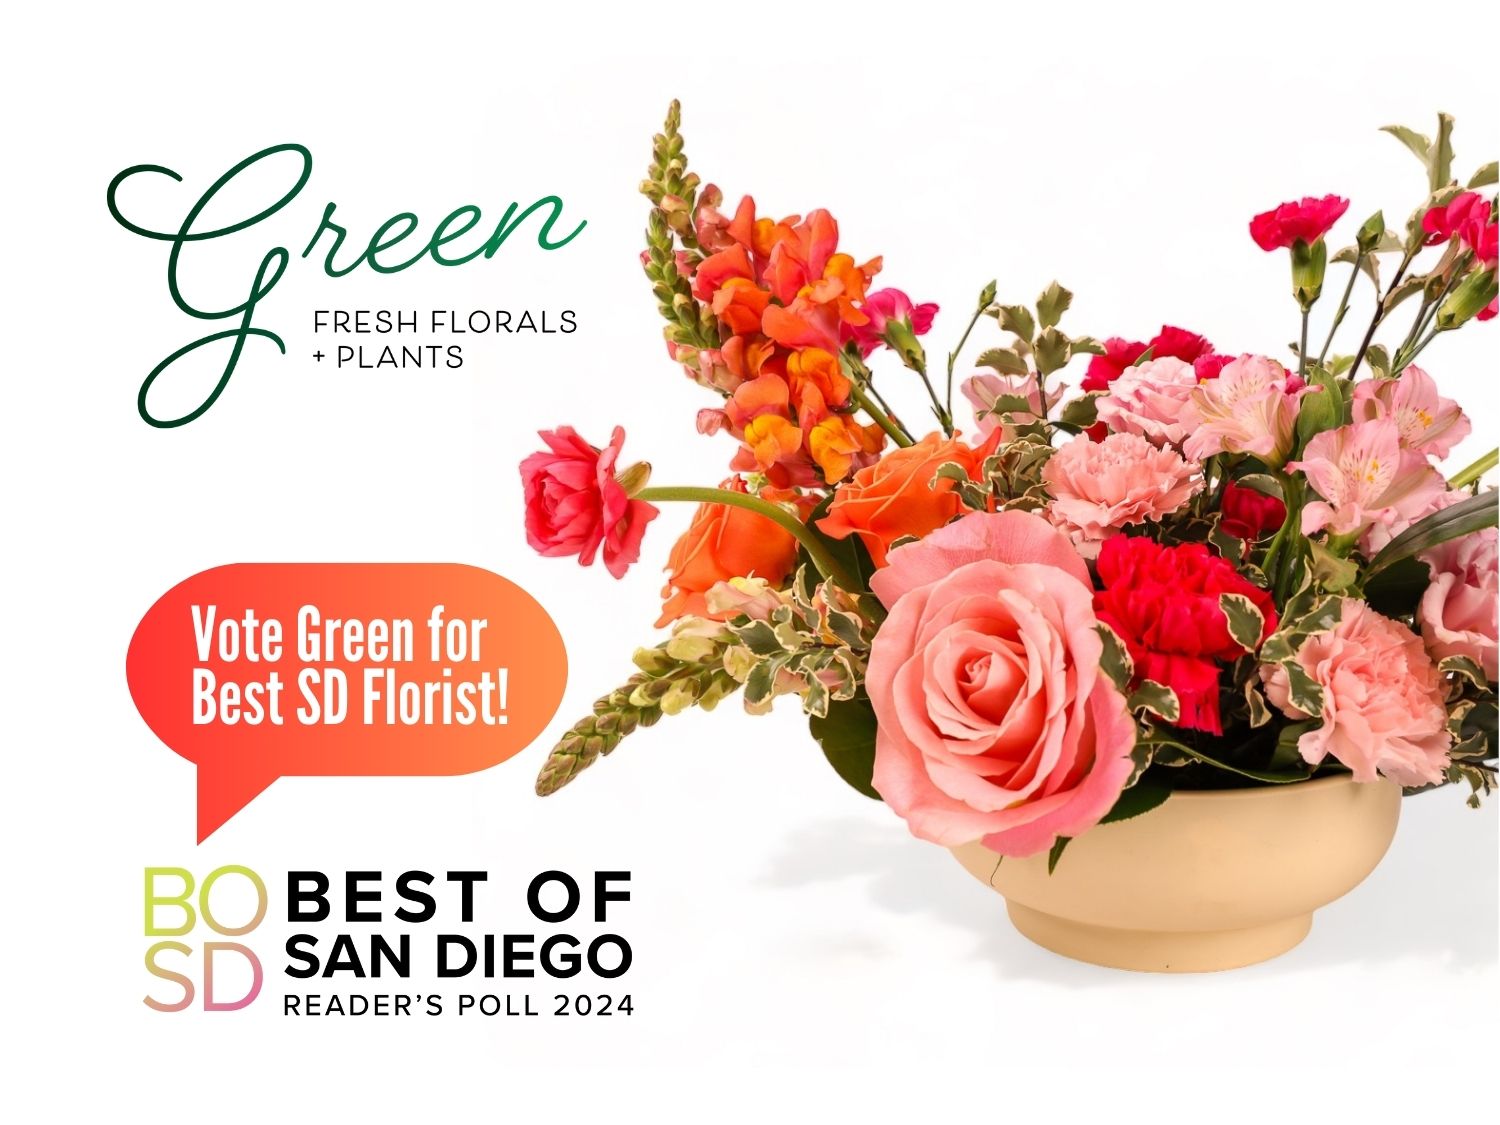 Vote for Green Fresh Florals + Plants for Best San Diego Florist from San Diego Magazine